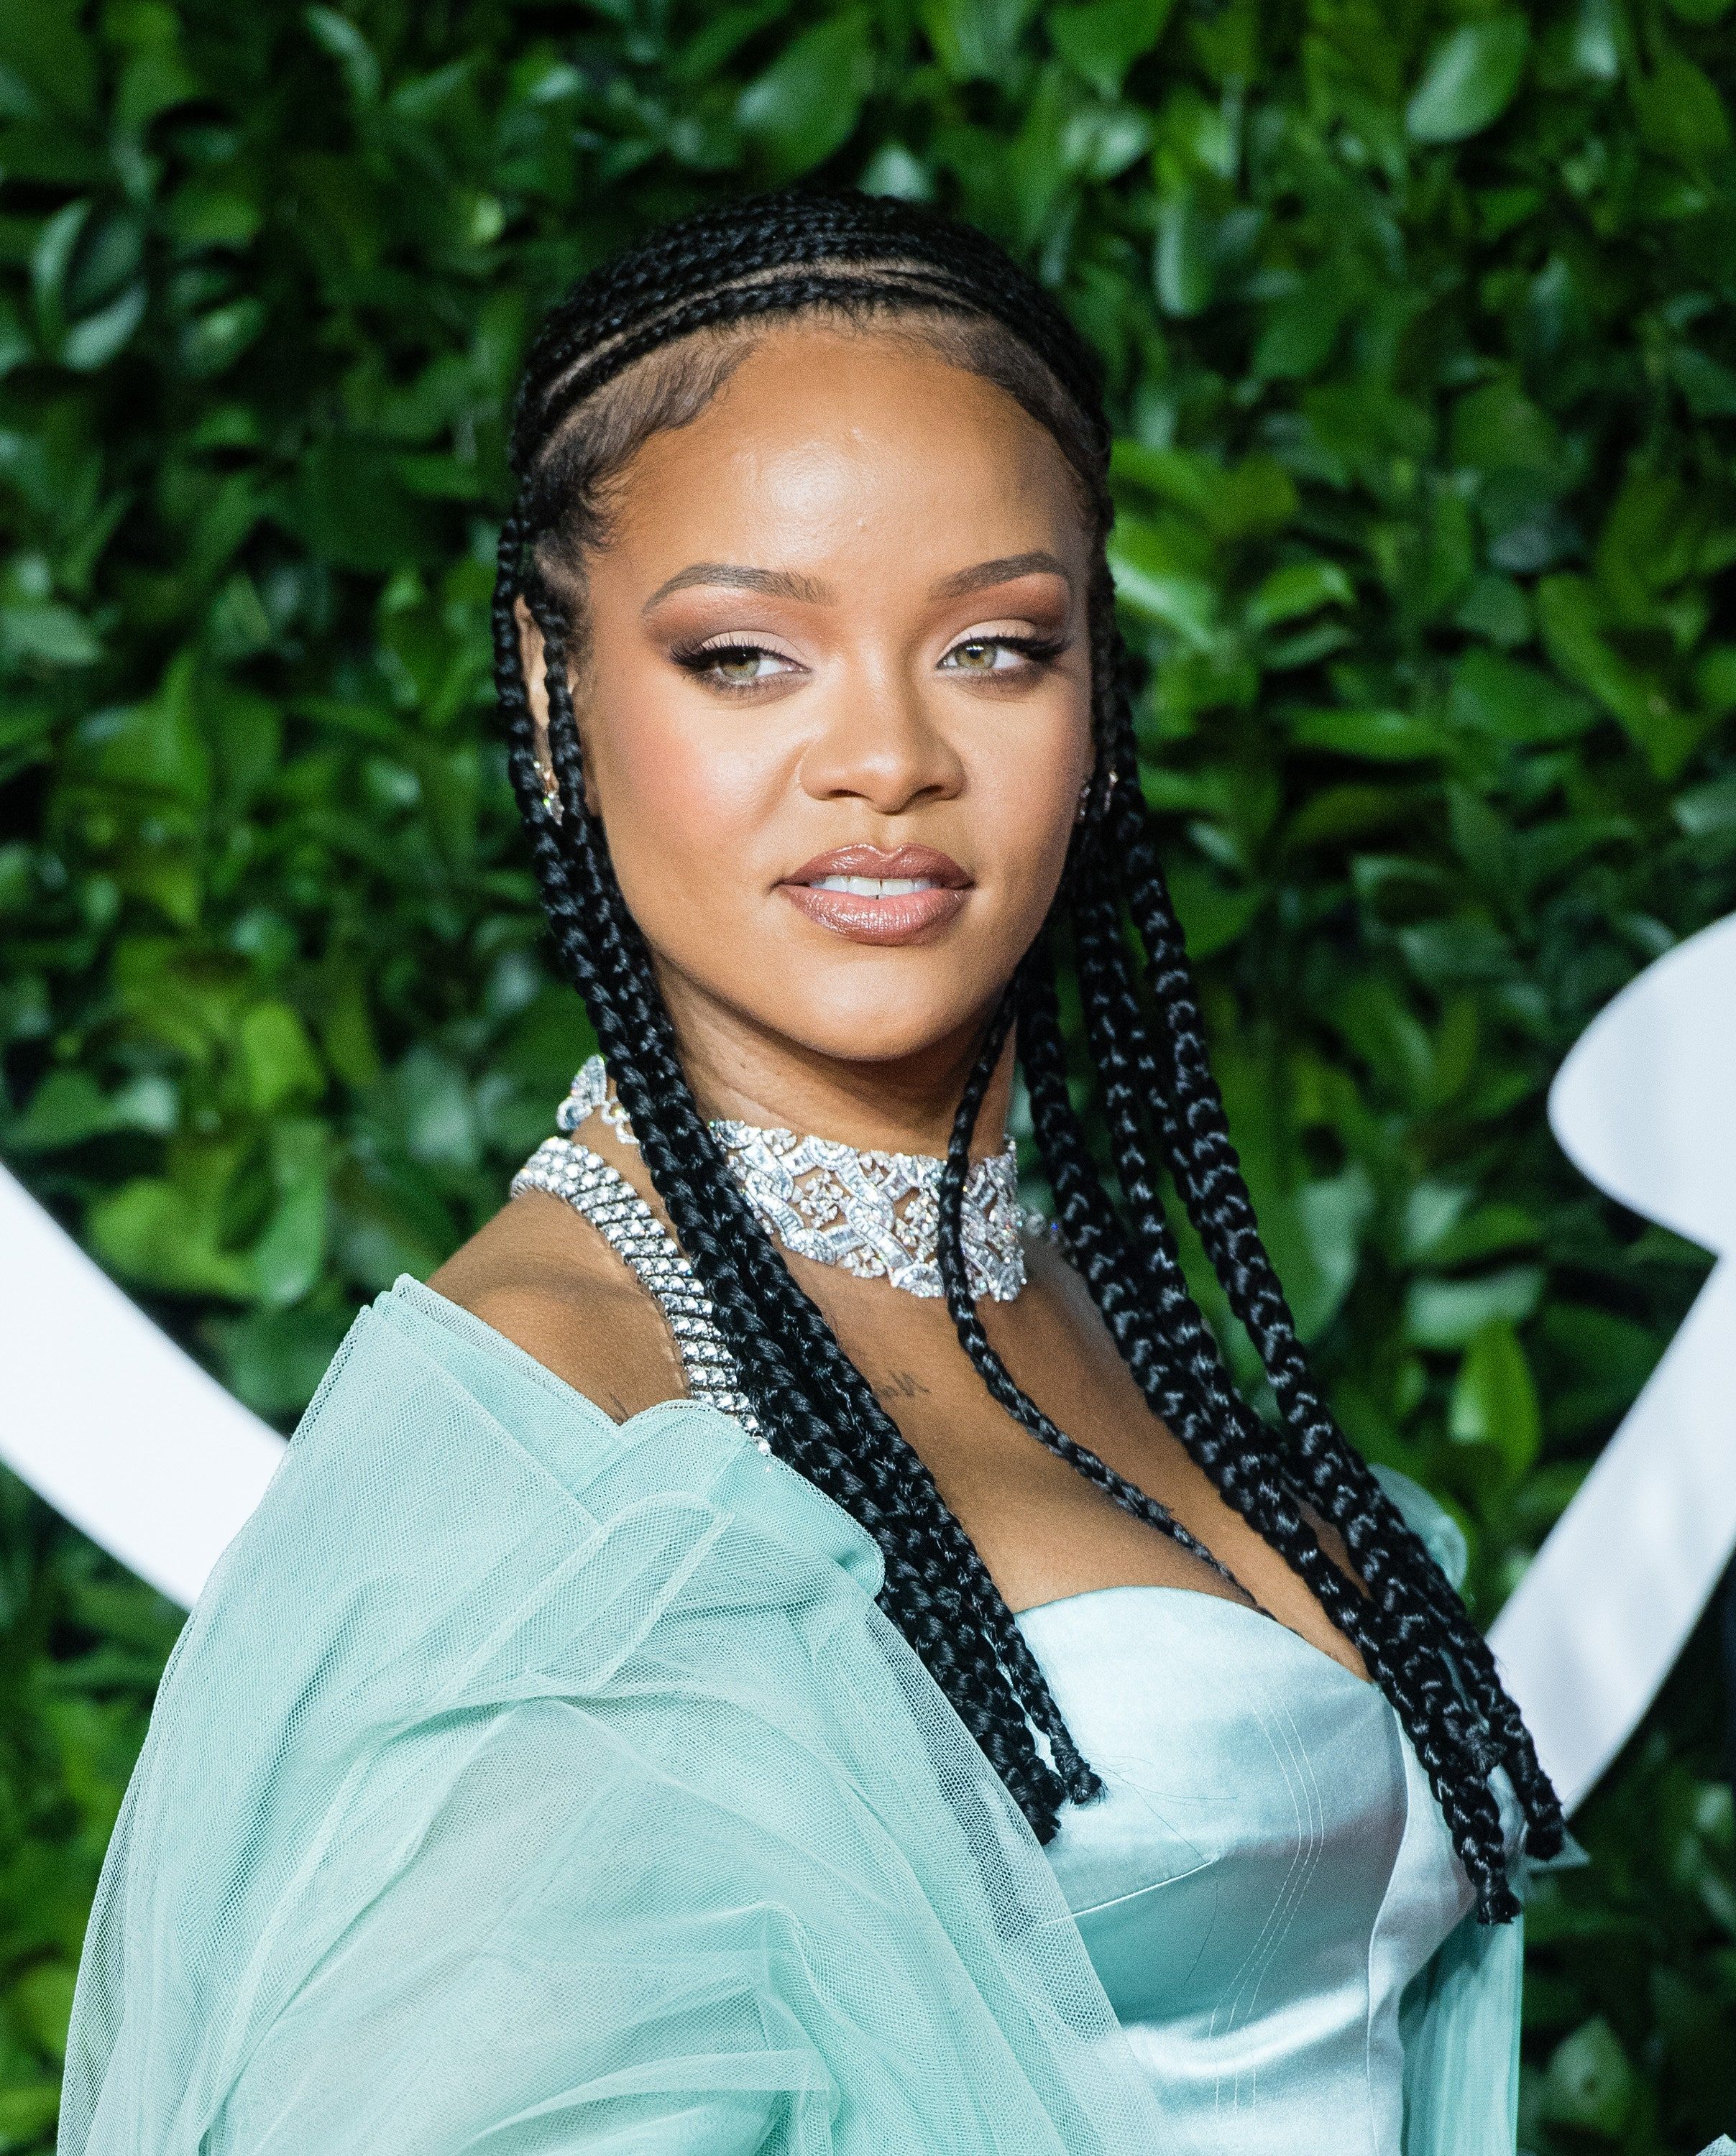 What's a TikTok House—And Why Does Rihanna Have One?